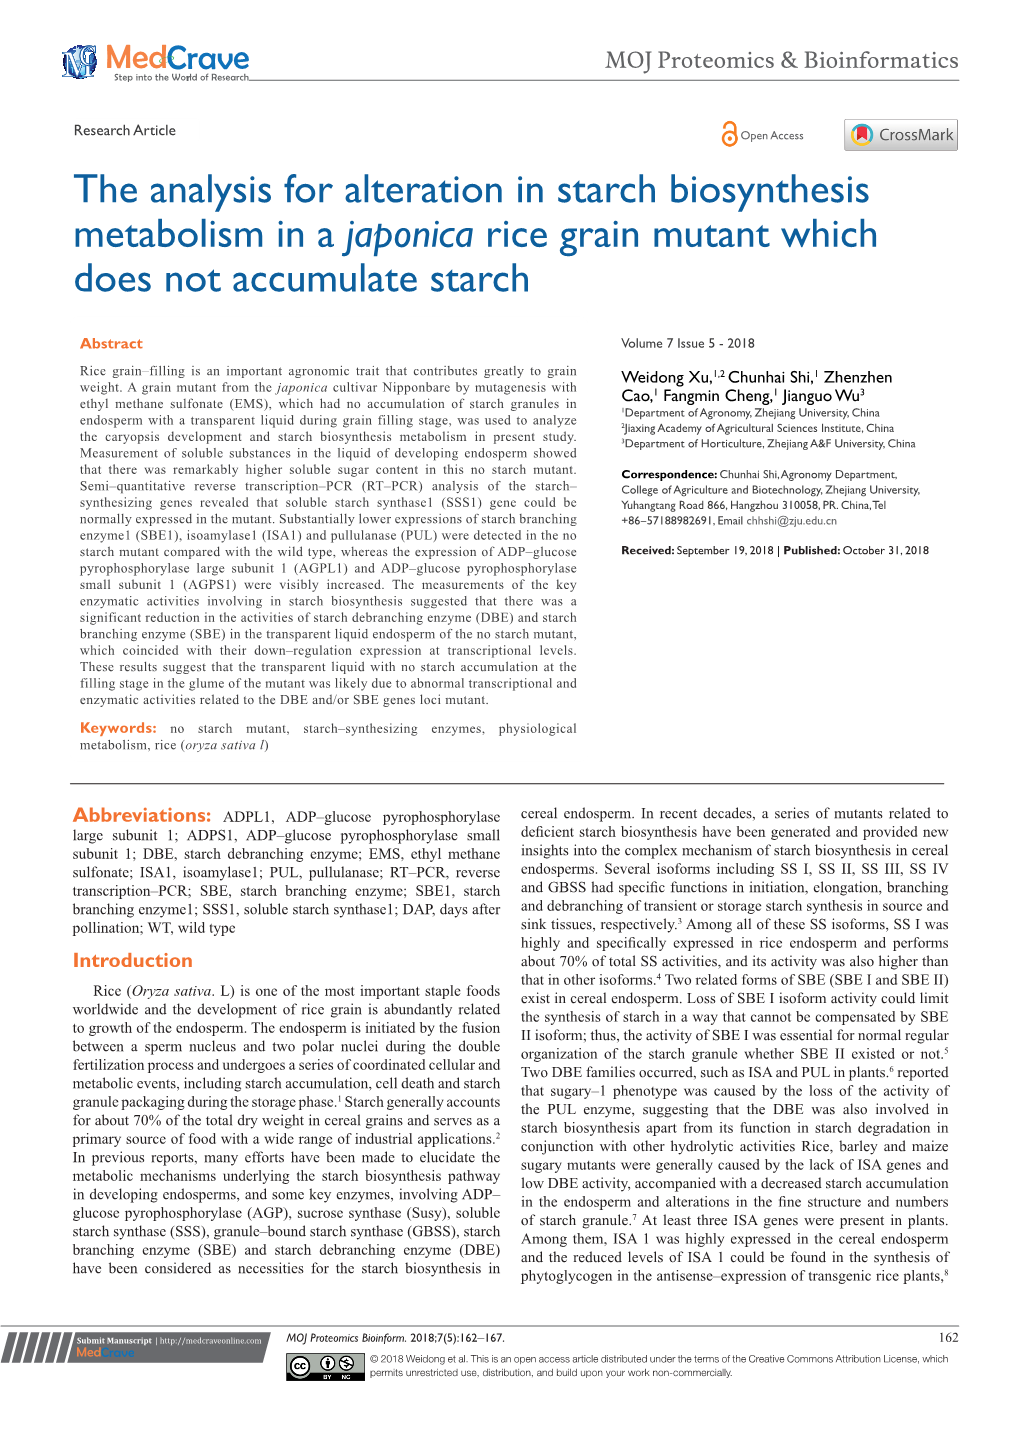 The Analysis for Alteration in Starch Biosynthesis Metabolism in a Japonica Rice Grain Mutant Which Does Not Accumulate Starch